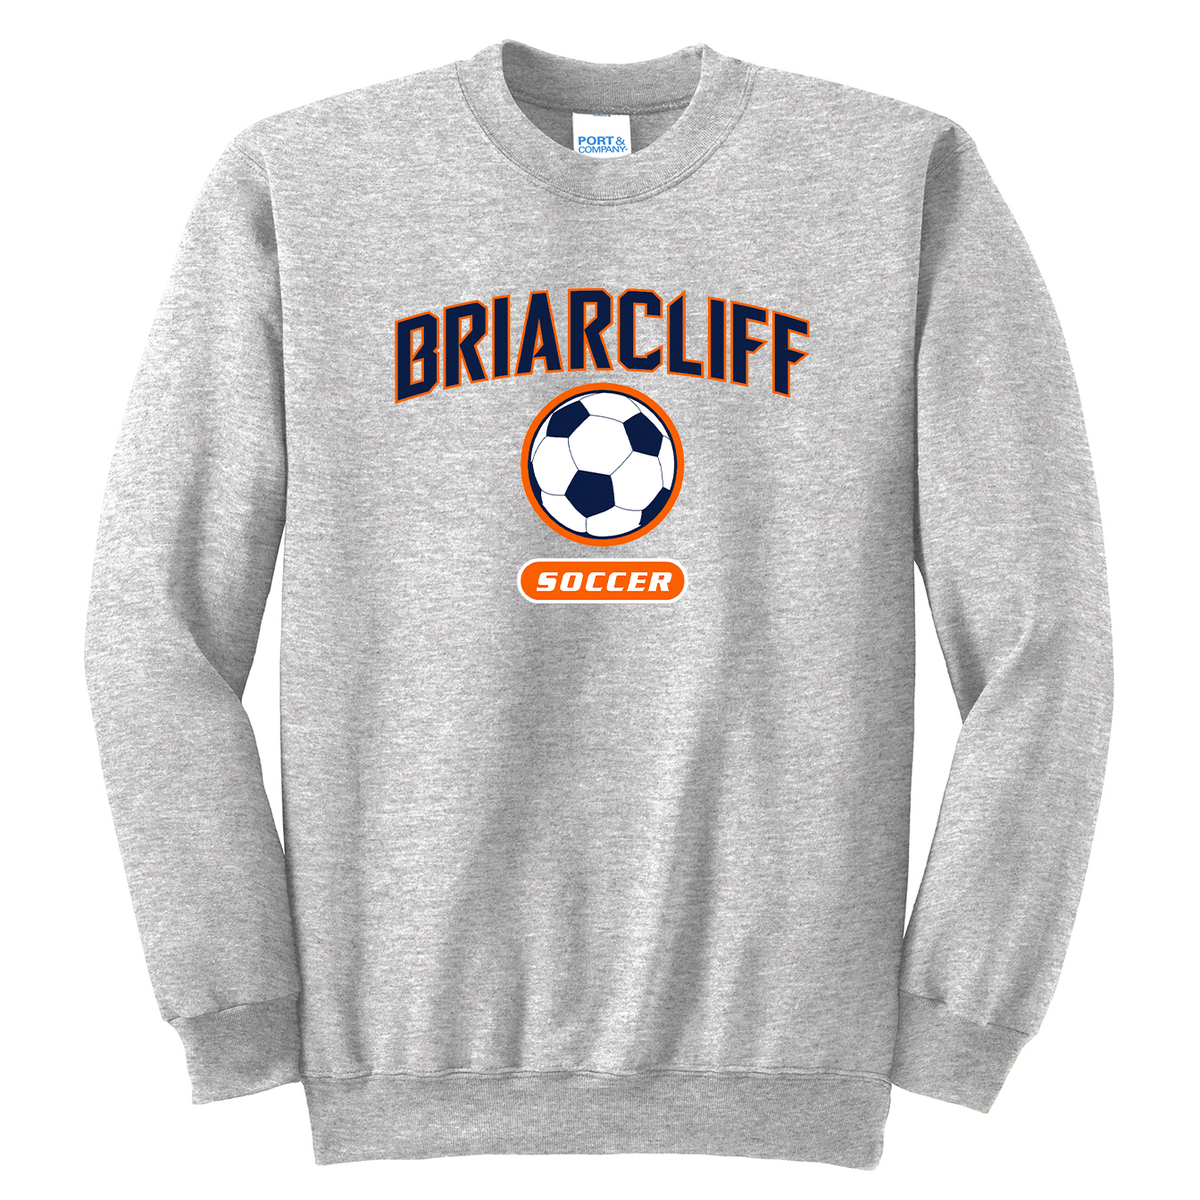 Briarcliff Soccer Crew Neck Sweater